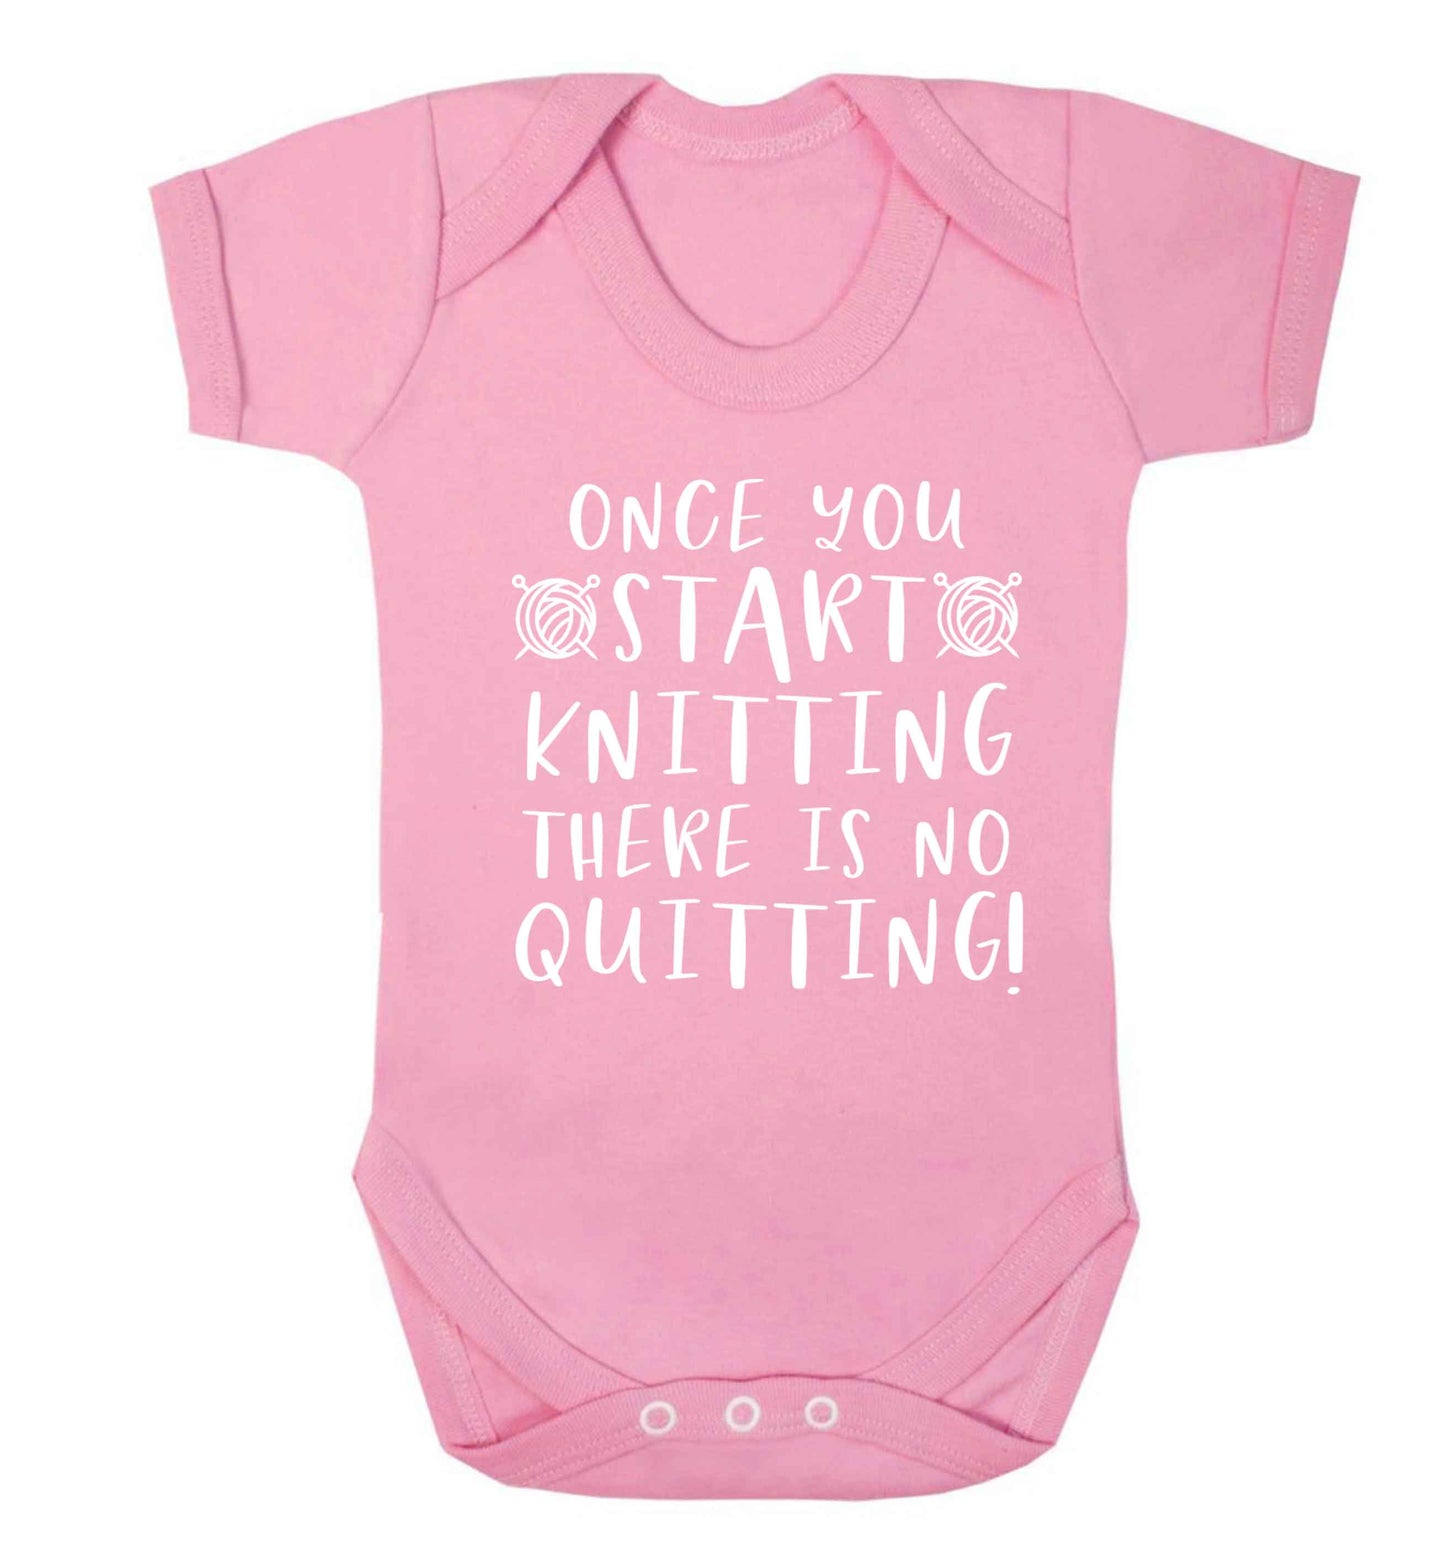 Once you start knitting there is no quitting! Baby Vest pale pink 18-24 months